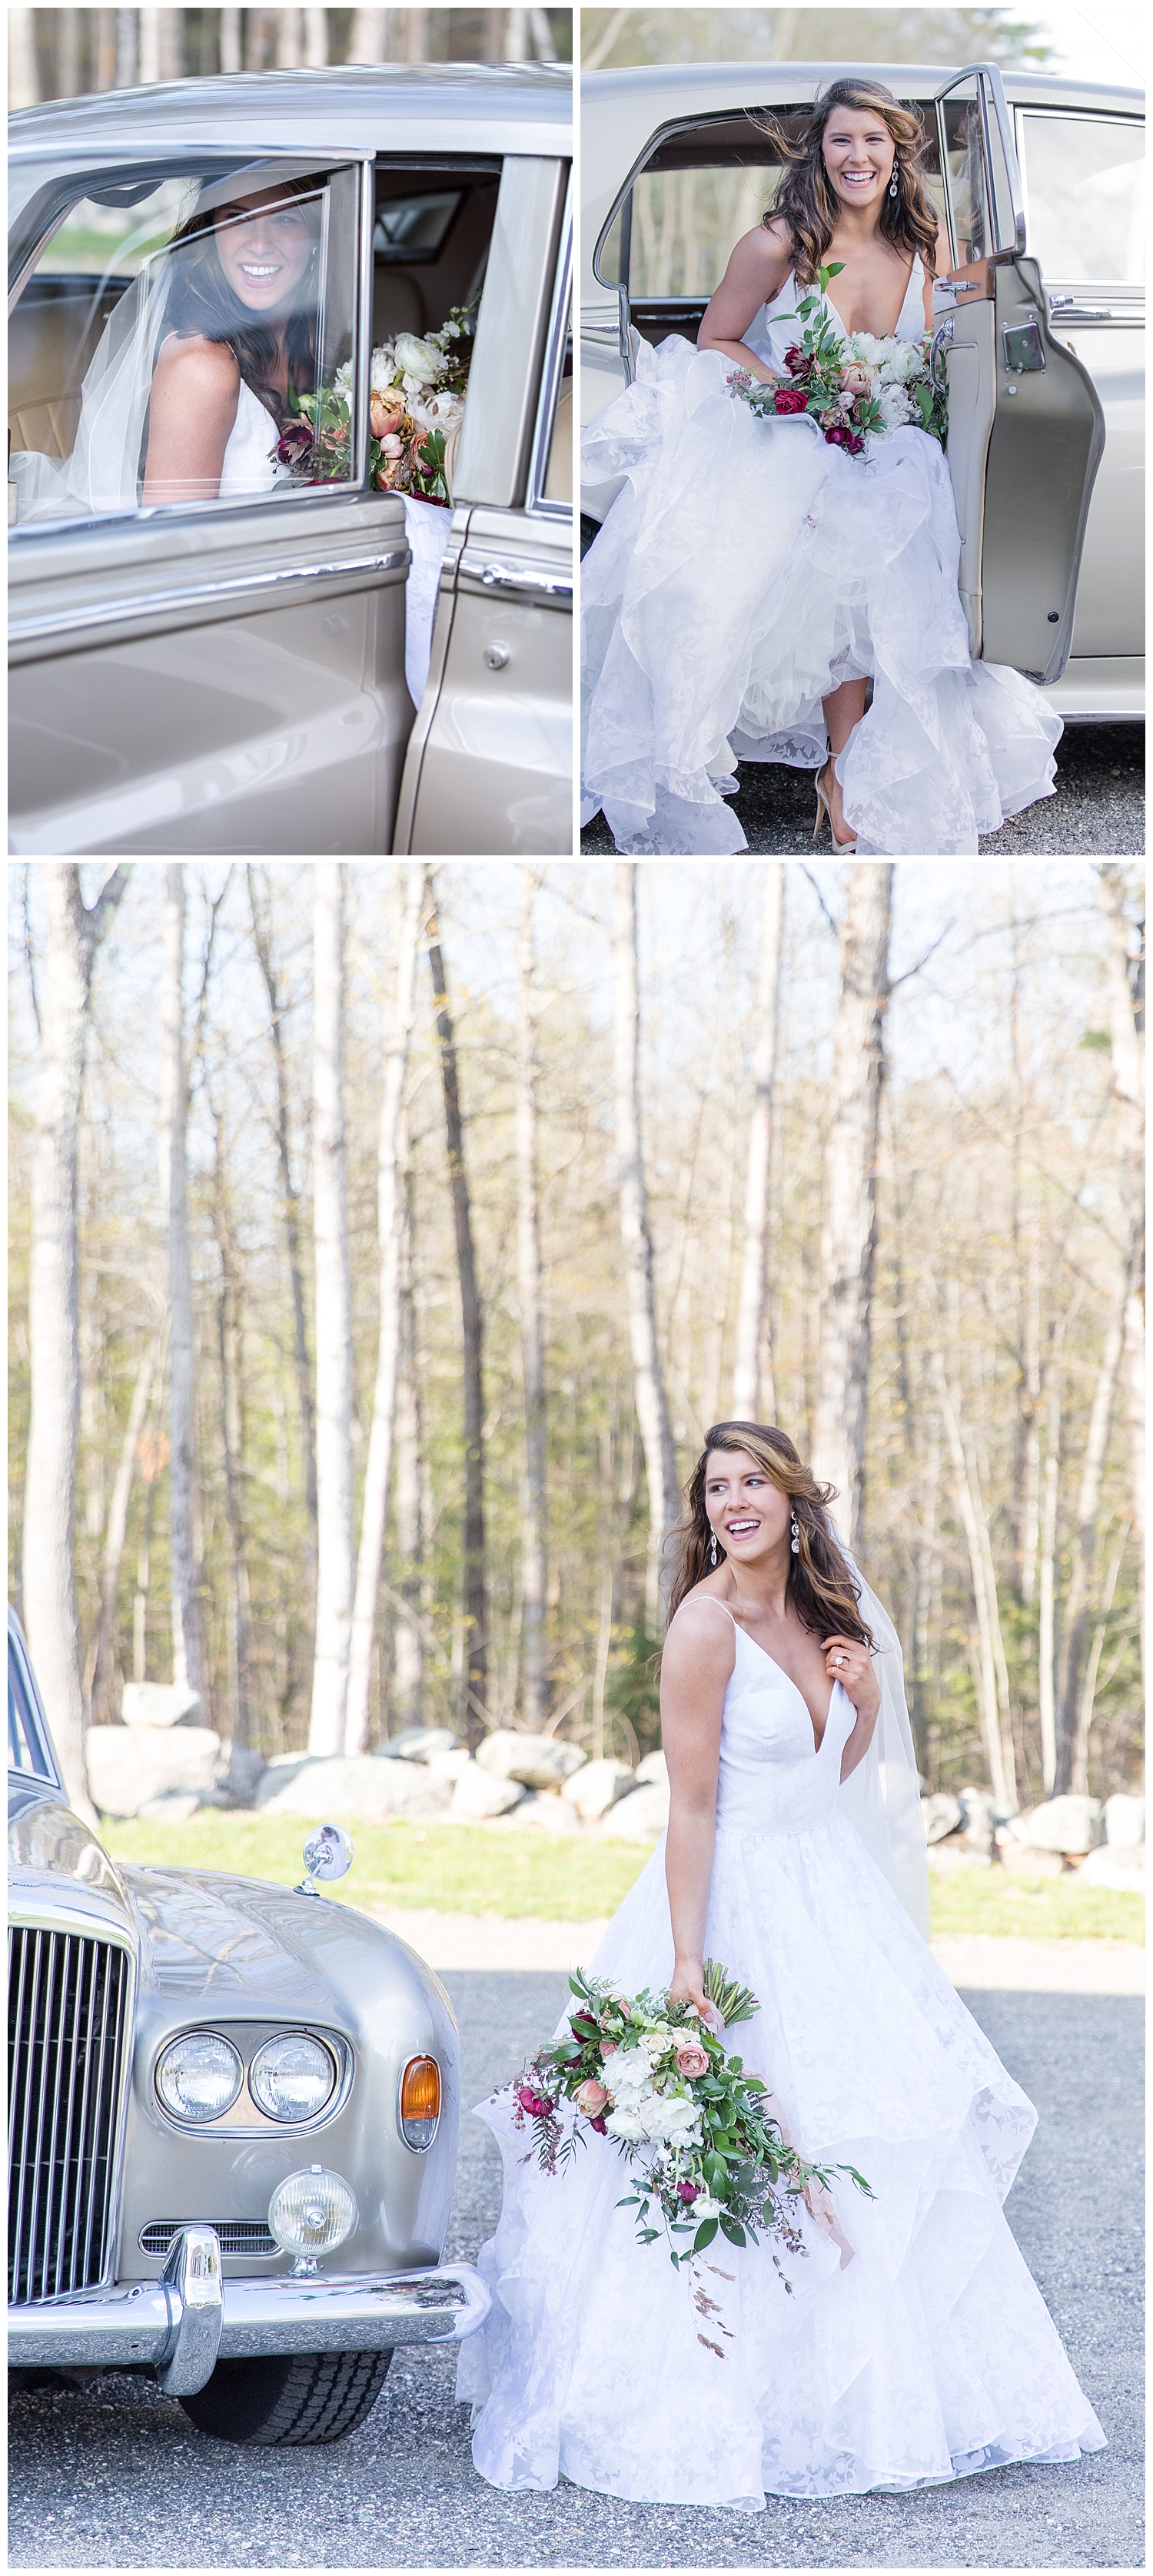 Portland, Maine wedding inspiration shoot at William Allen Farm with photography by halie. Floral design by Honeysuckle Way. Model Kaitlyn Beckwith and gown provided by Andrea's Bridal. Hair & Makeup by Sarah and Co. Designs. Vintage Bentley car provided by Maine Limousine.